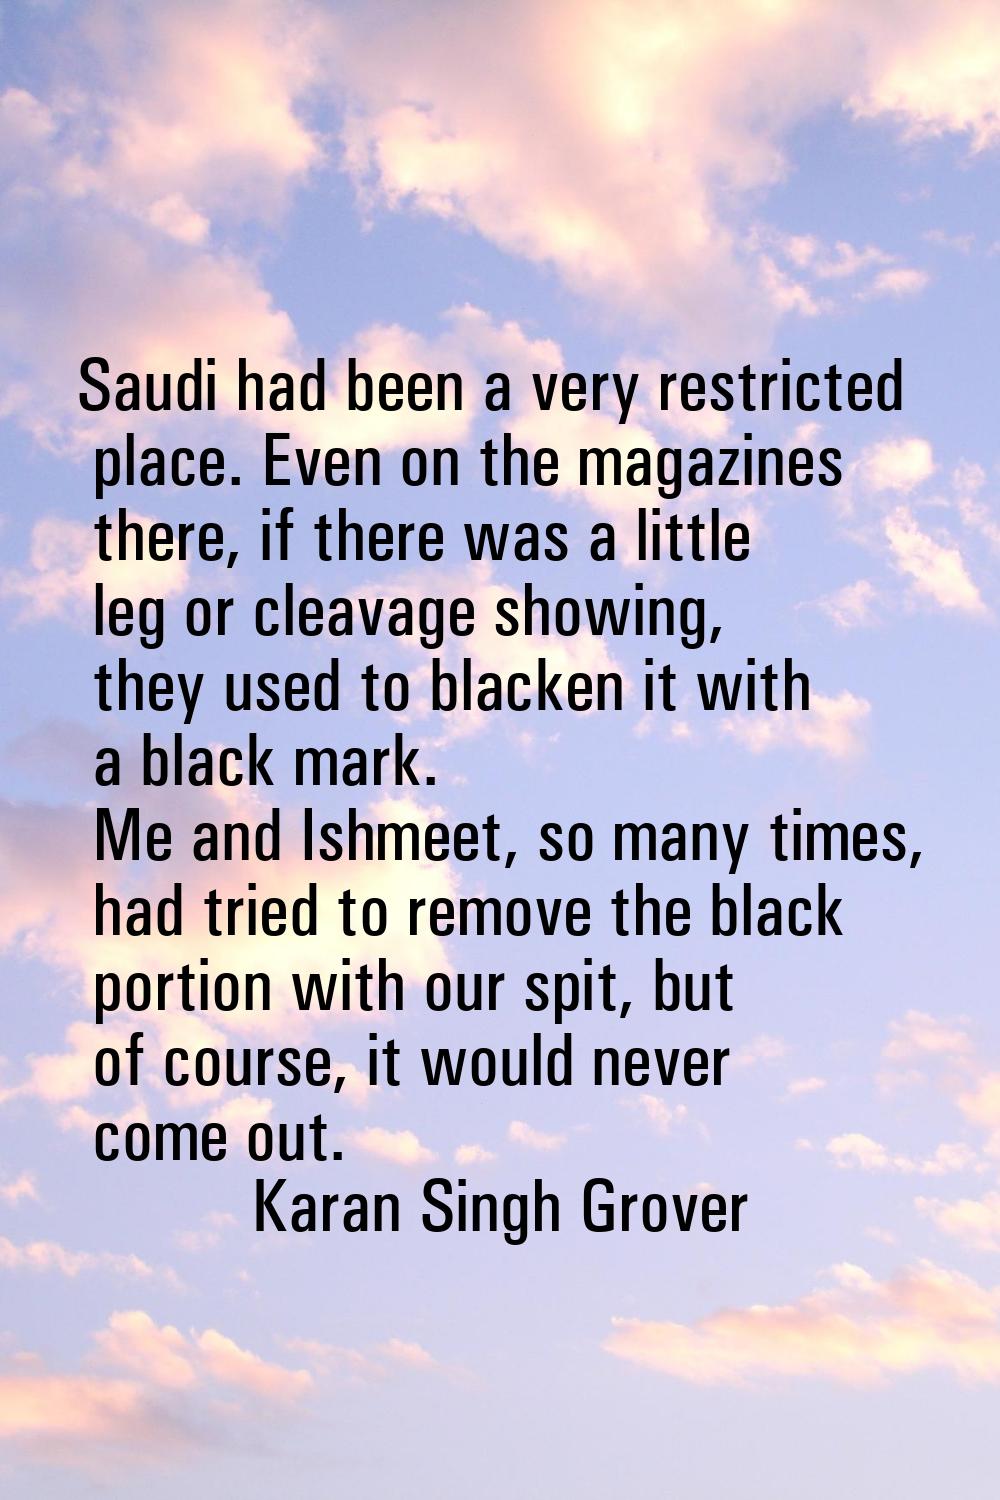 Saudi had been a very restricted place. Even on the magazines there, if there was a little leg or c